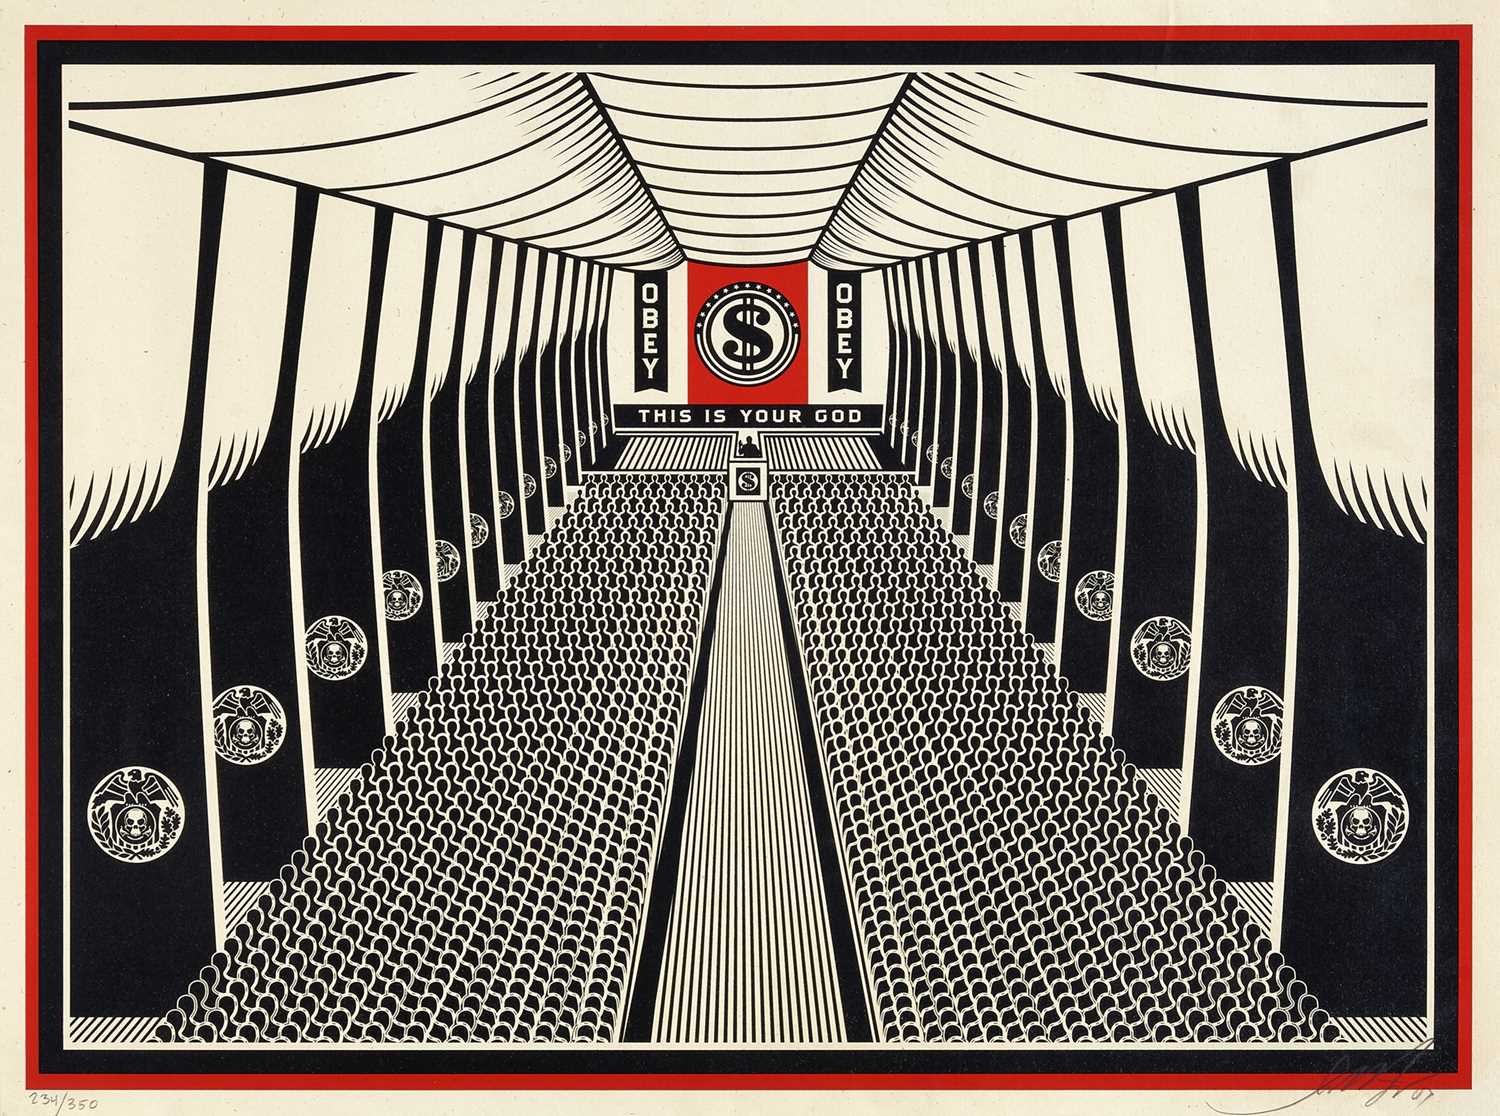 Lot 227 - Shepard Fairey (American 1970-), 'This Is Your Church', 2011